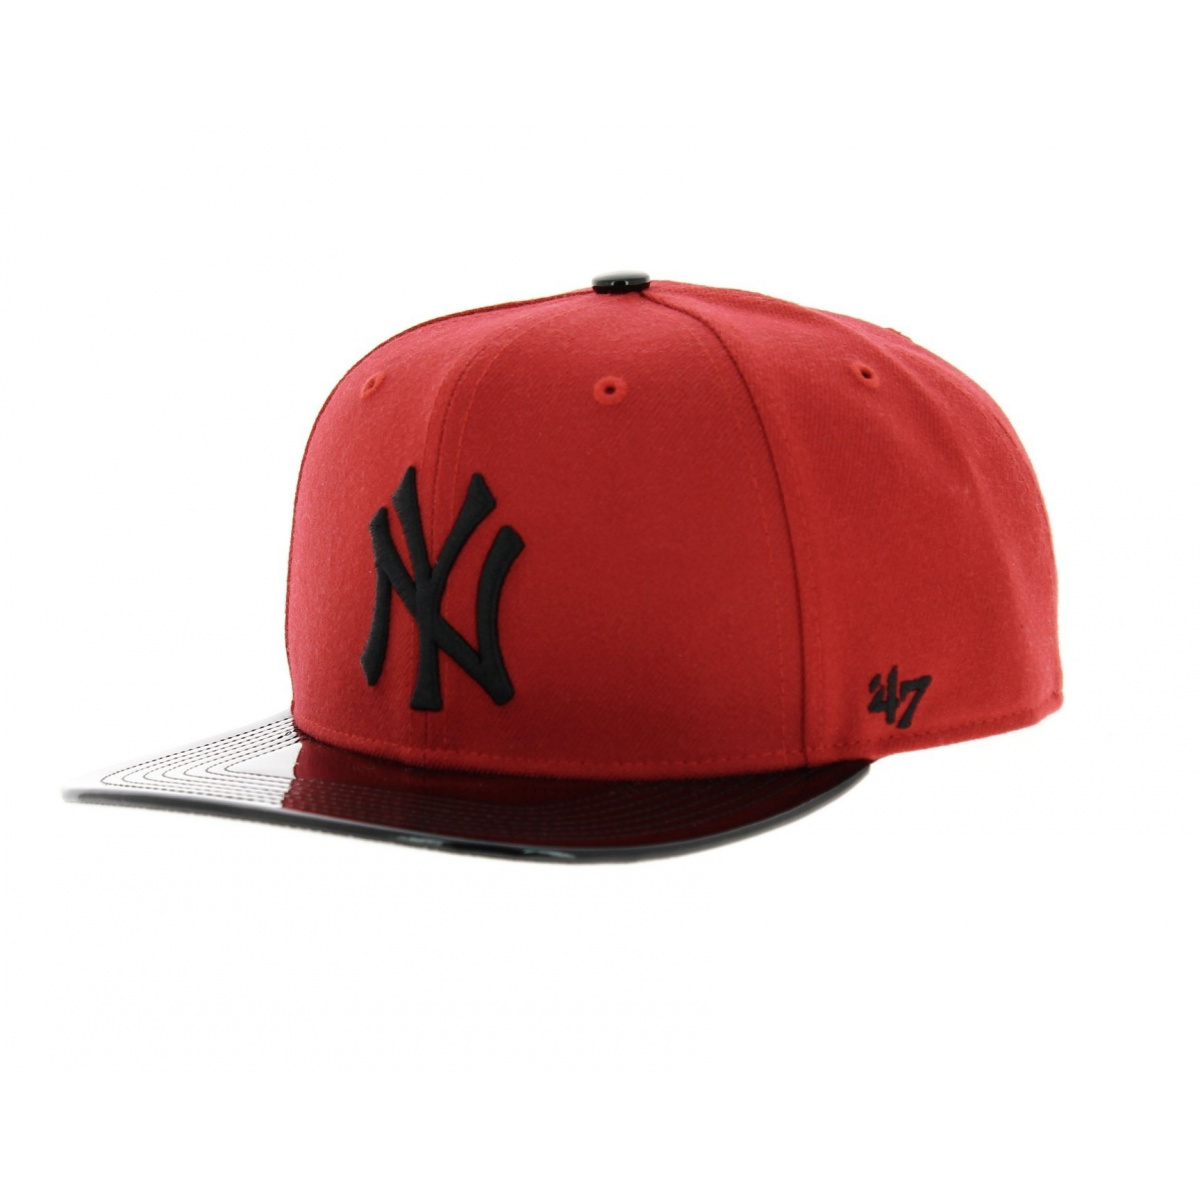 Casquette New York Yankees Rouge - 47 Brand Reference : 5626